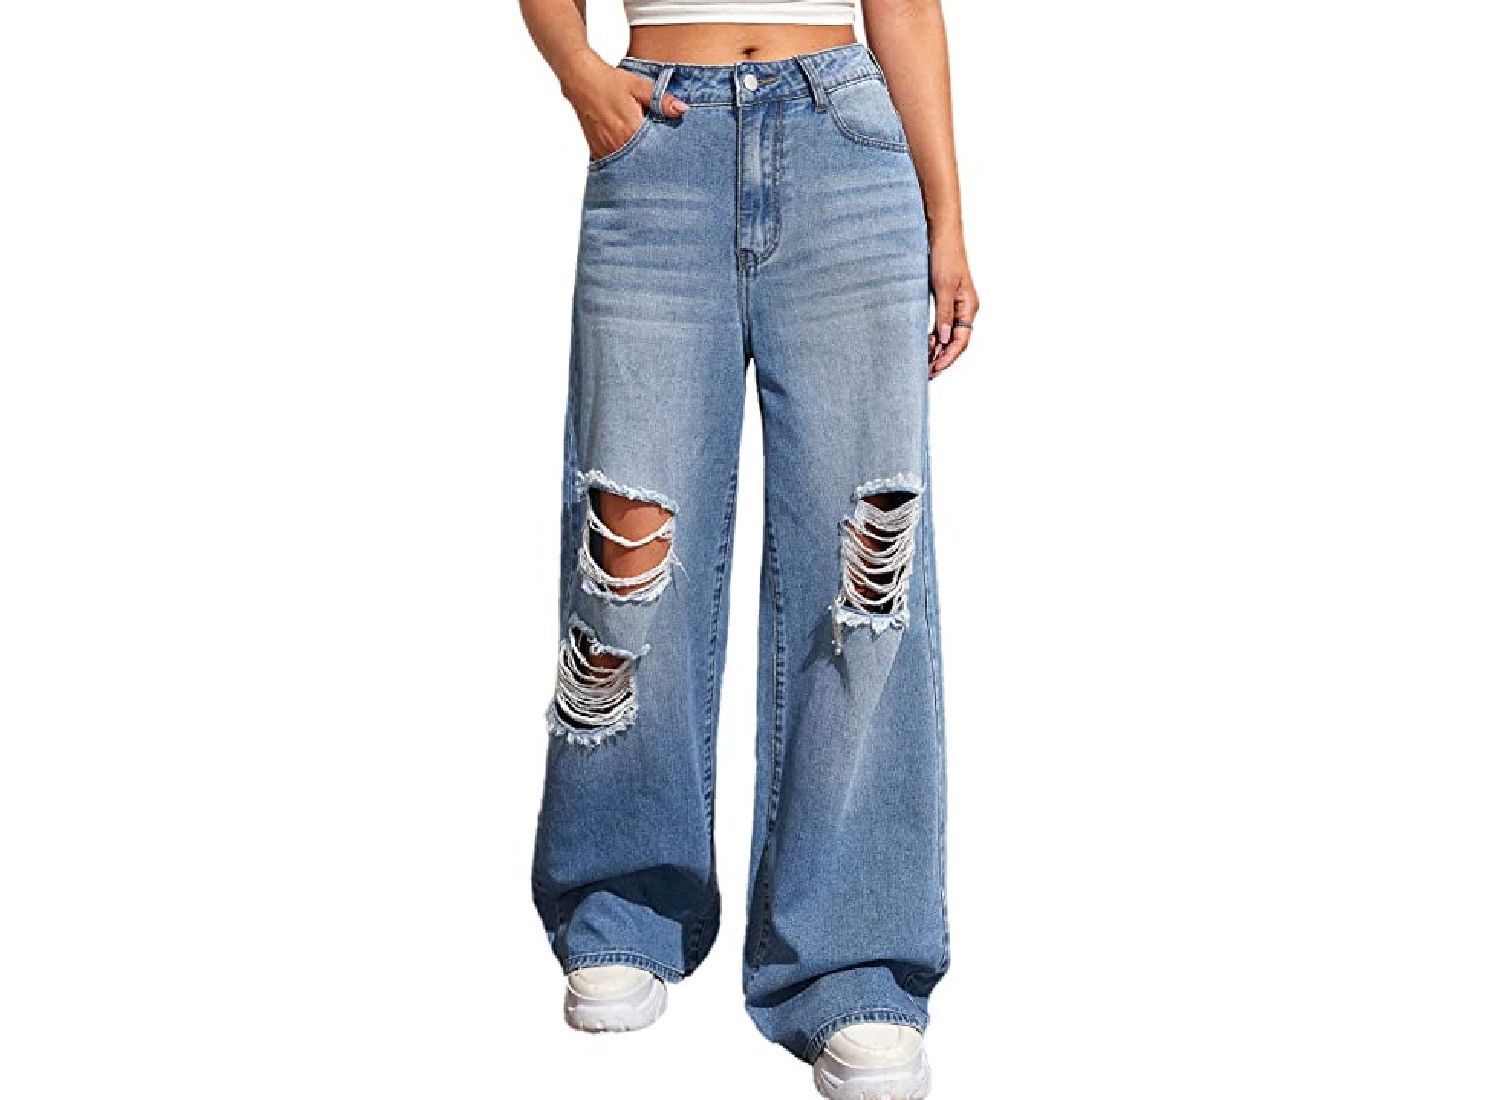 A pair of relaxed, torn jeans.